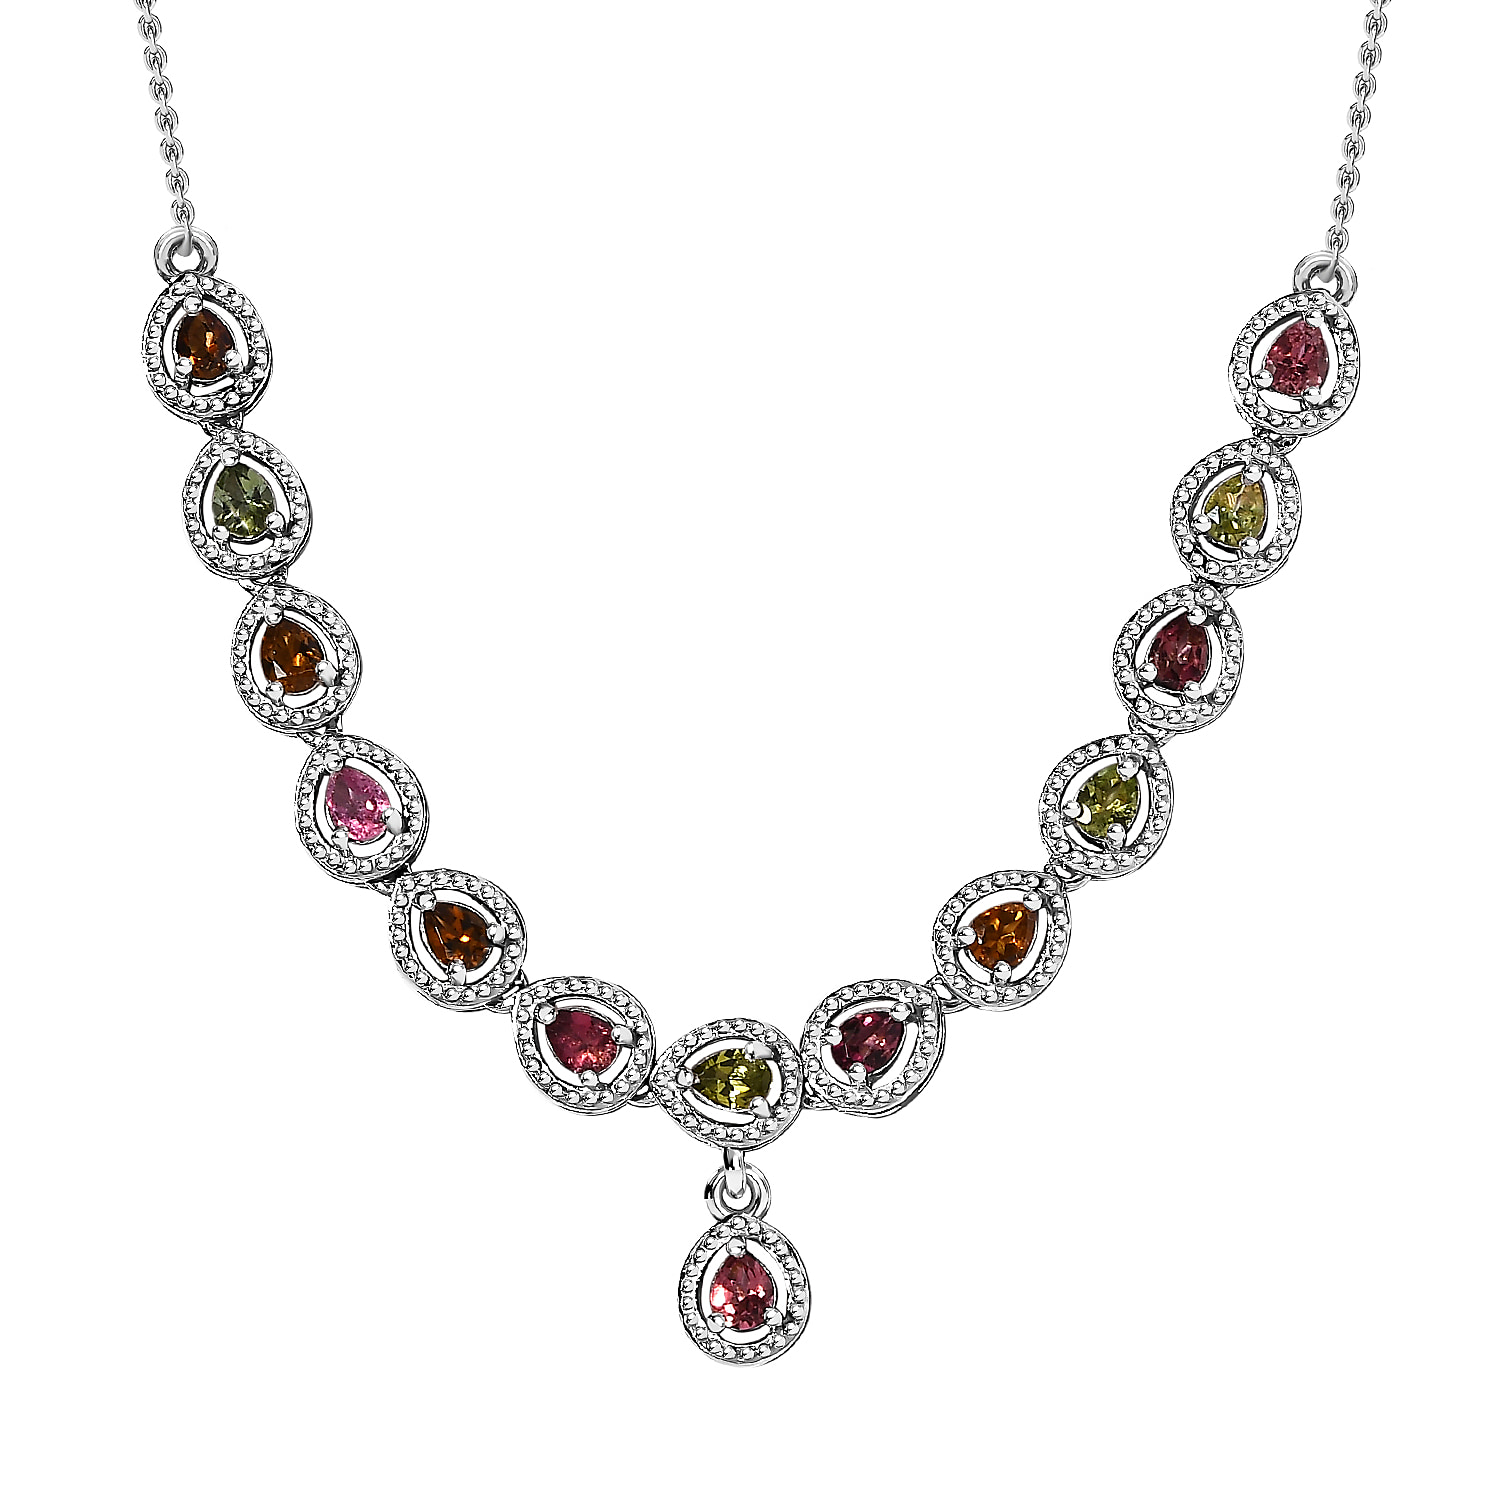 Multi-Tourmaline Necklace (Size - 20) in Sterling Silver 2.03 Ct, Silver Wt. 9.60 GM